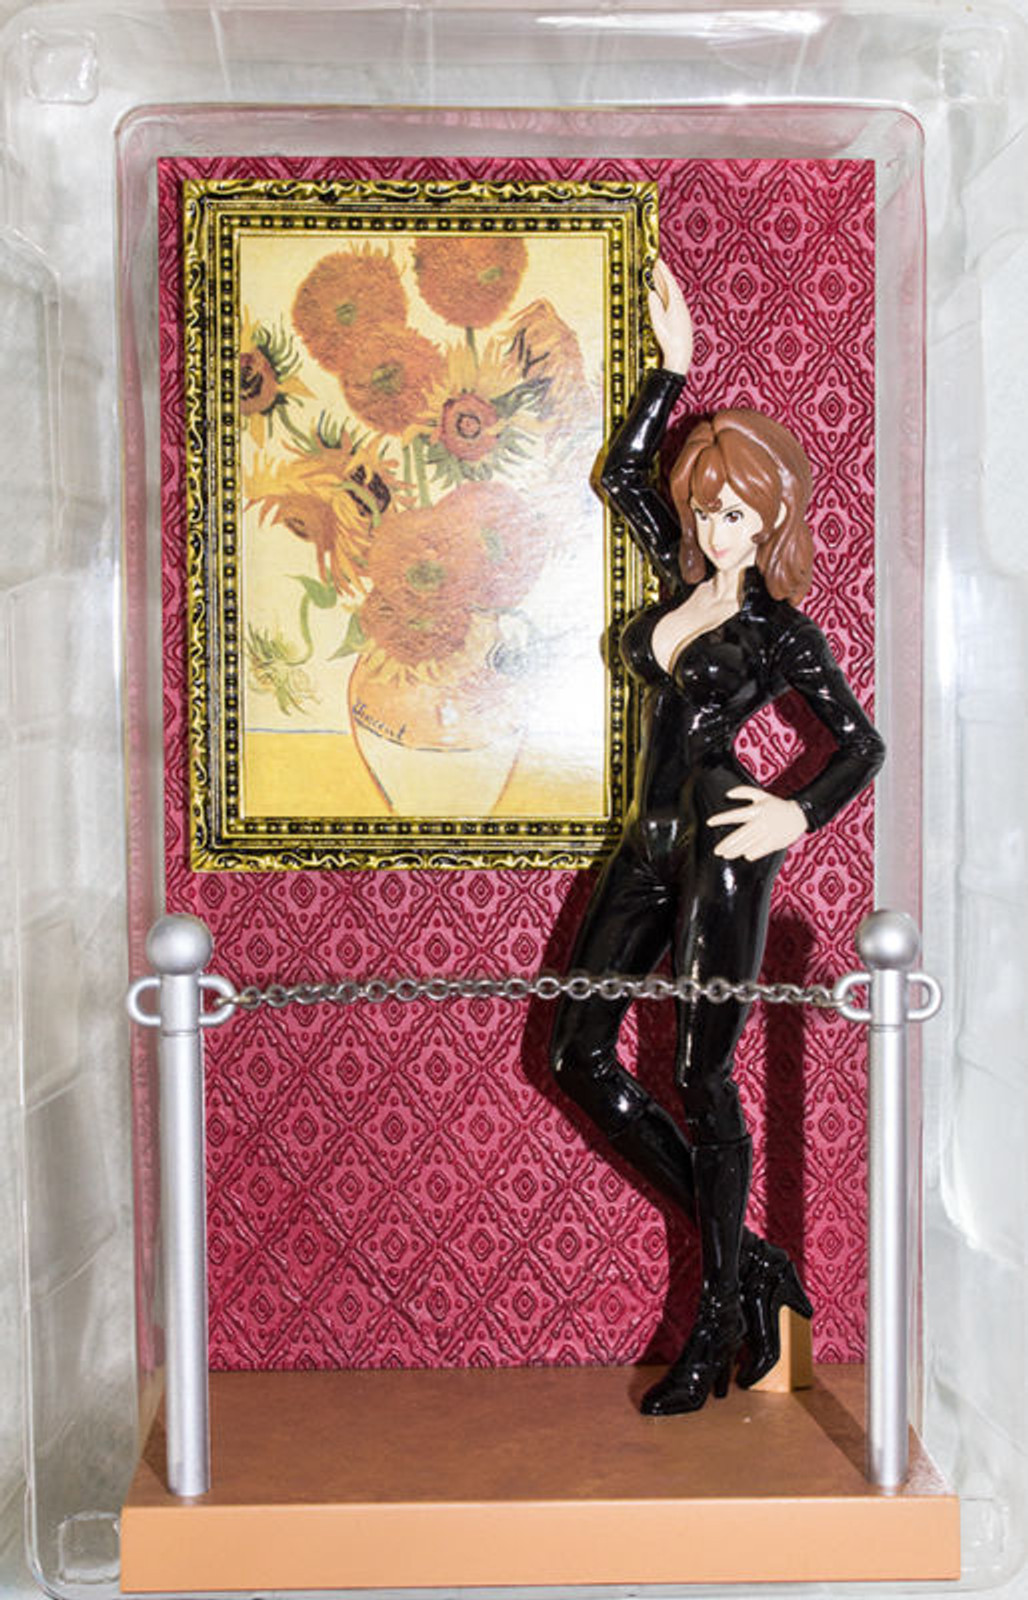 Lupin the Third (3rd) Fujiko Mine Steal Famaous Pictures Figure JAPAN ANIME MANGA